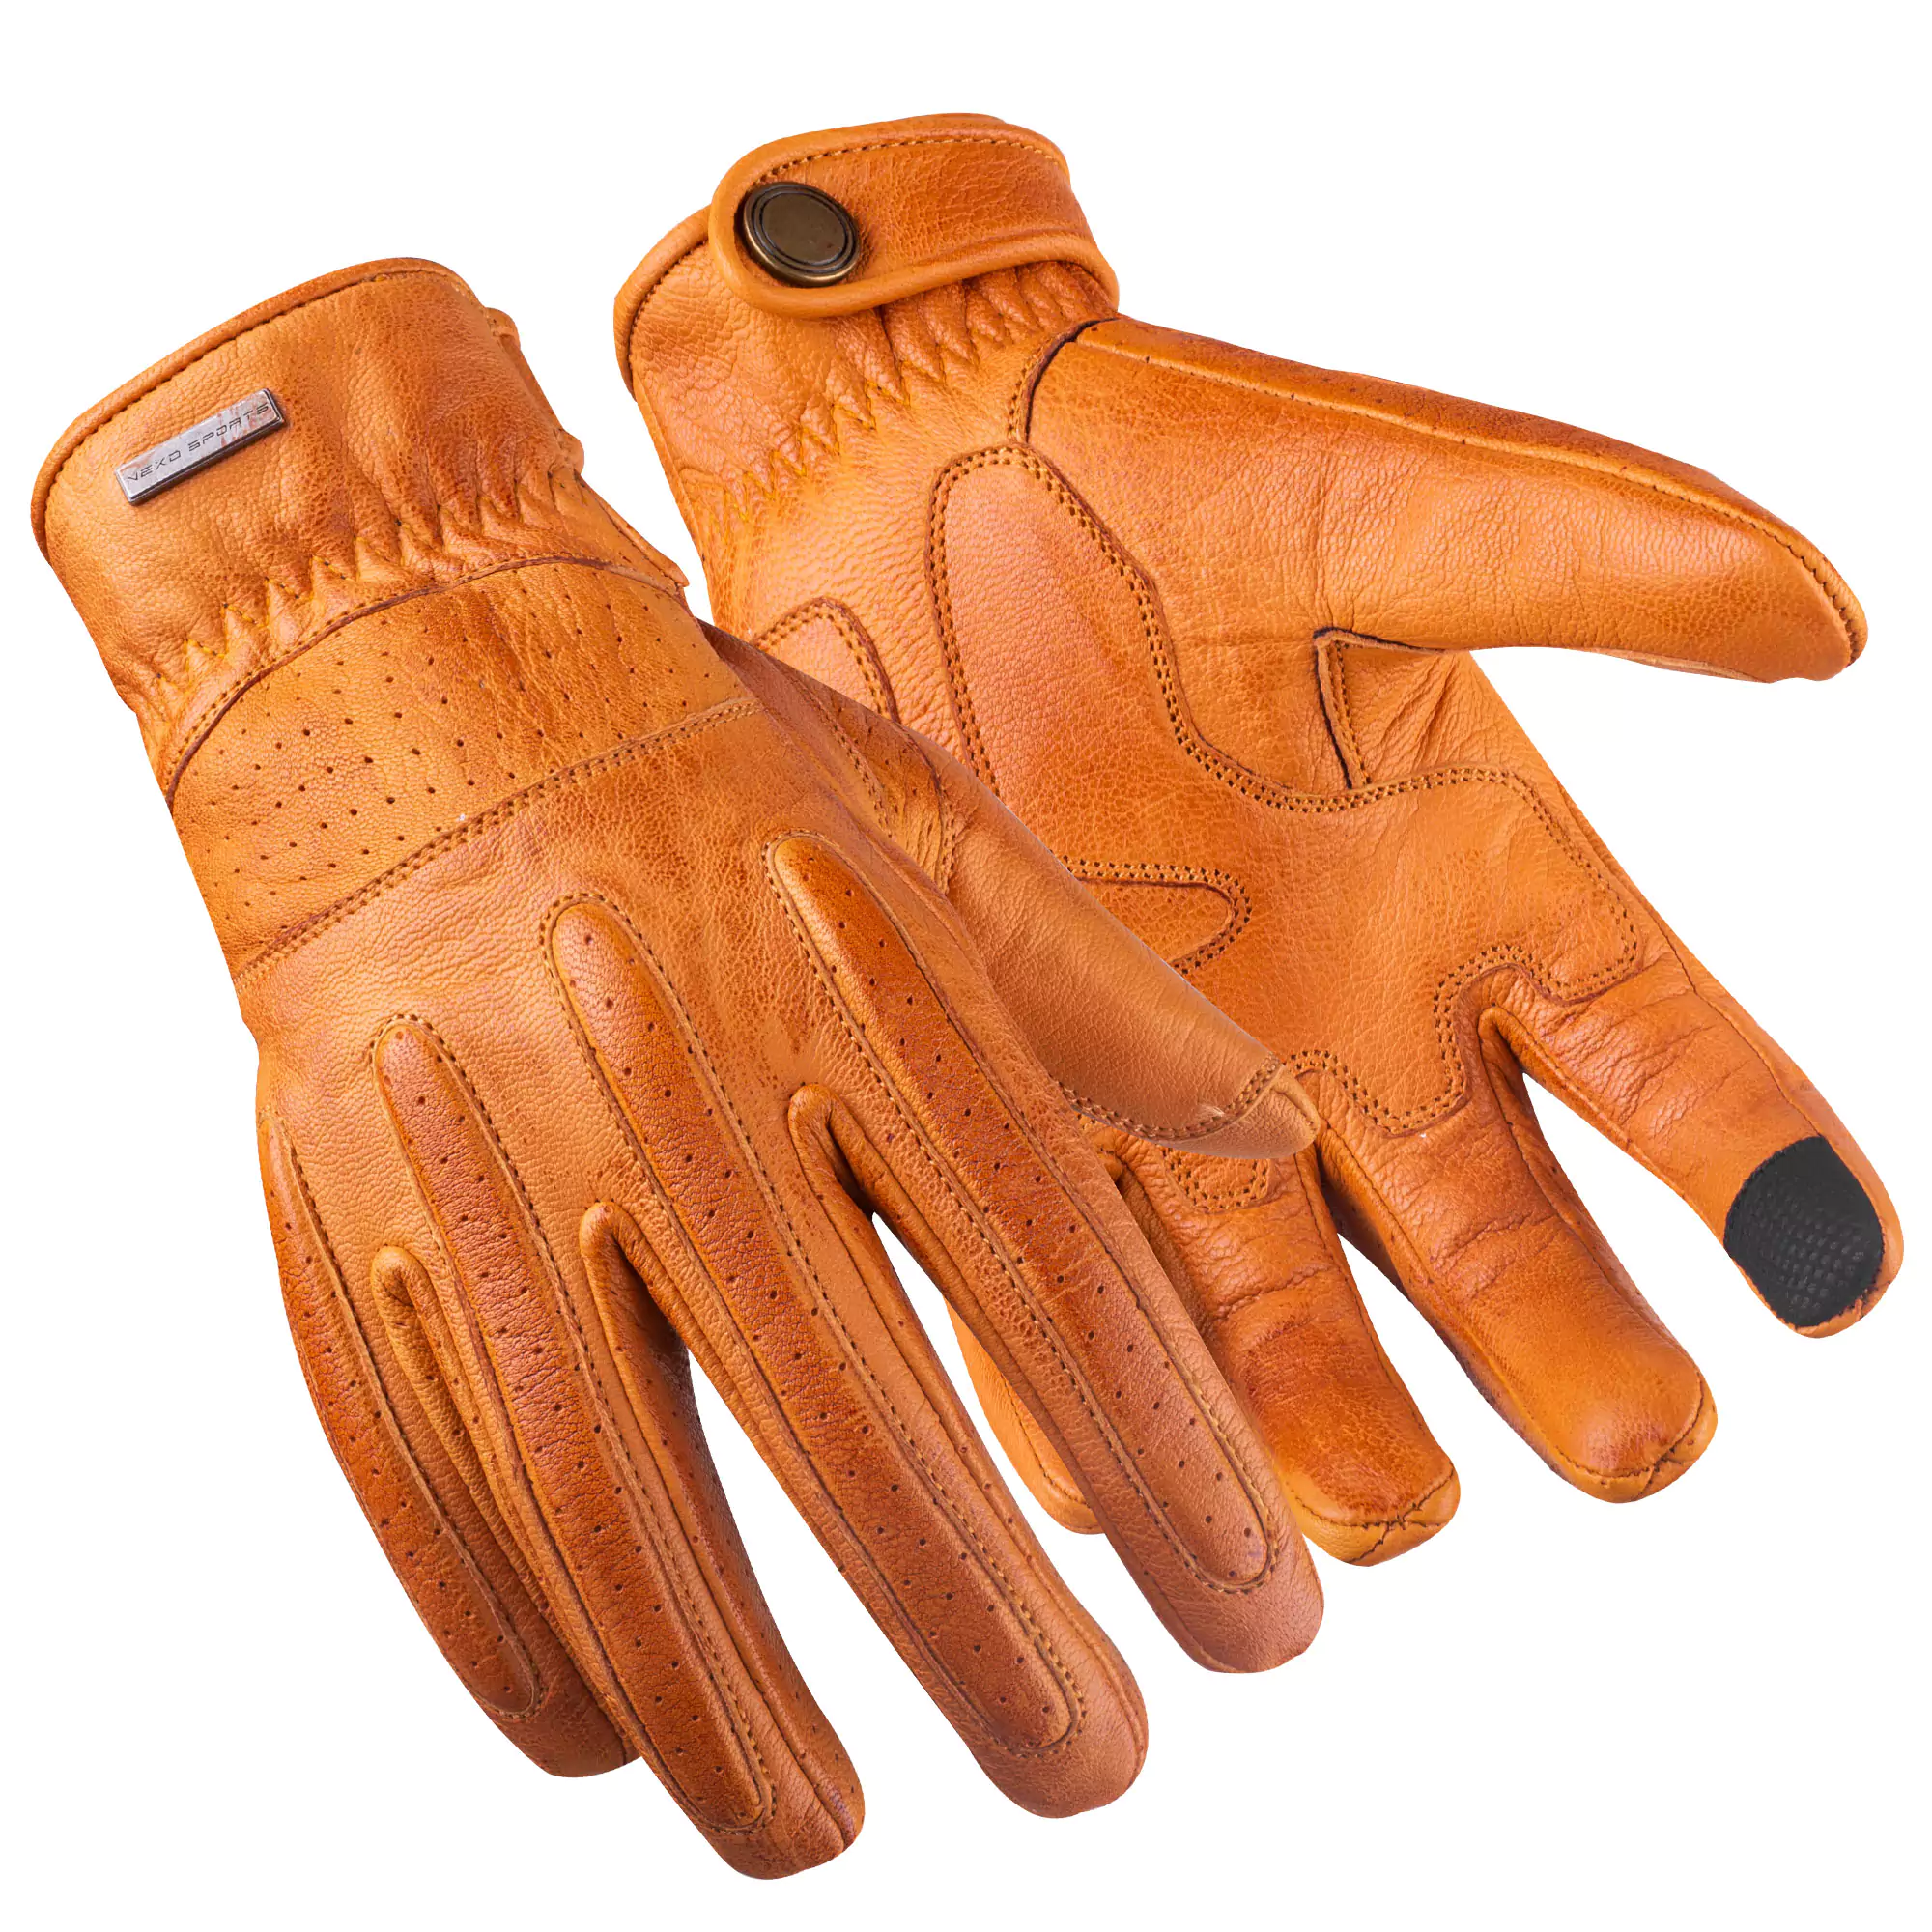 Cafe racer motorcycle gloves designed for style and protection during rides.